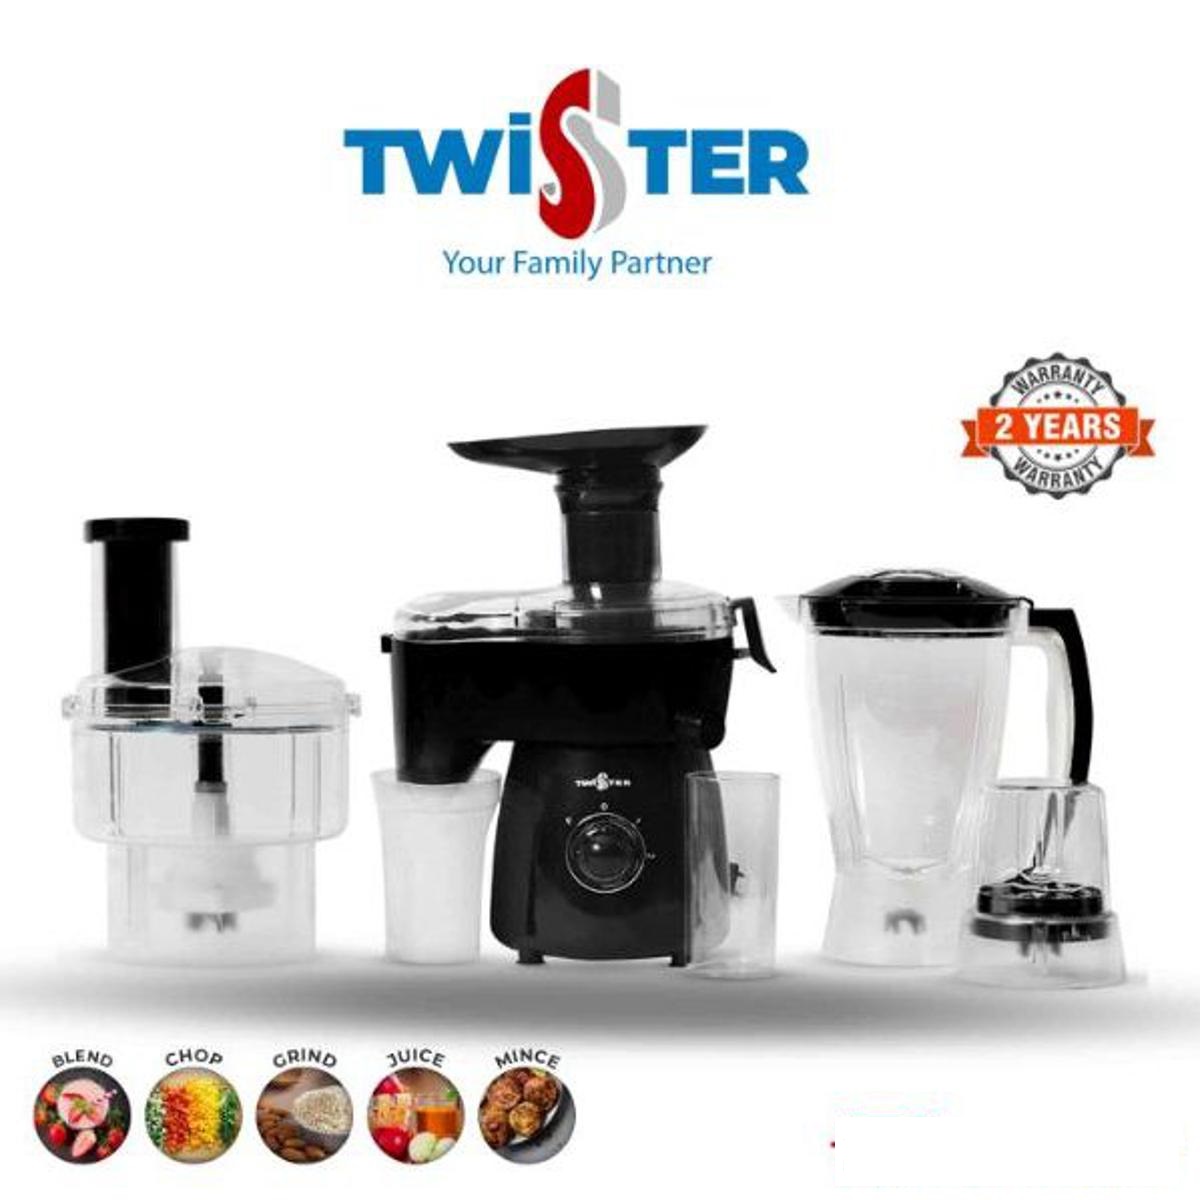 11 in 1 Twister Food Factory FP-4200-UB Price in Pakistan